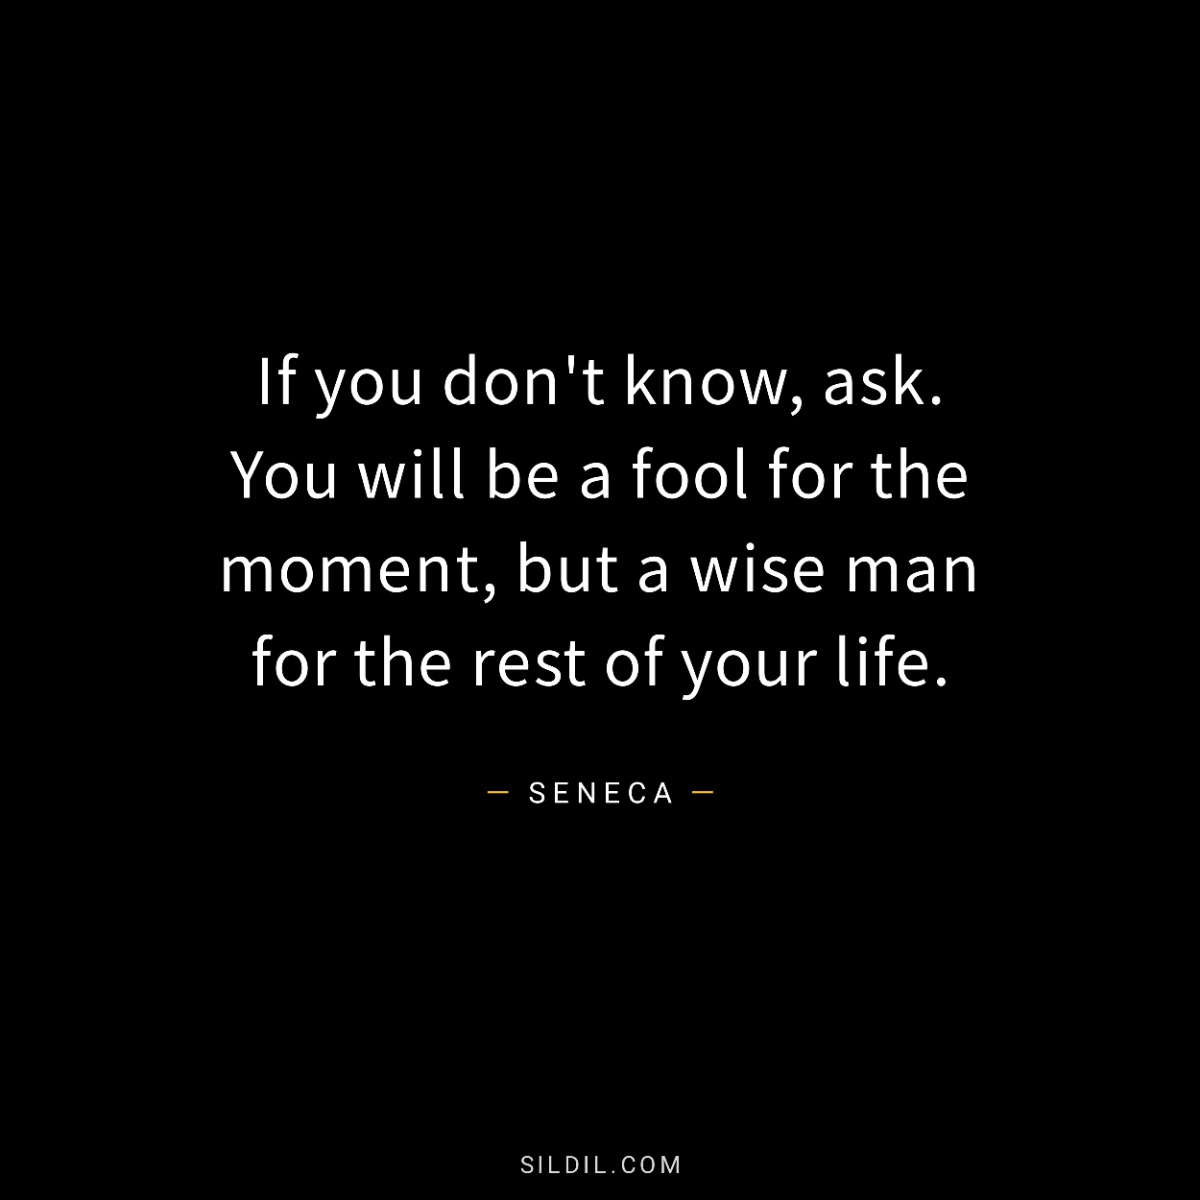 If you don't know, ask. You will be a fool for the moment, but a wise man for the rest of your life.